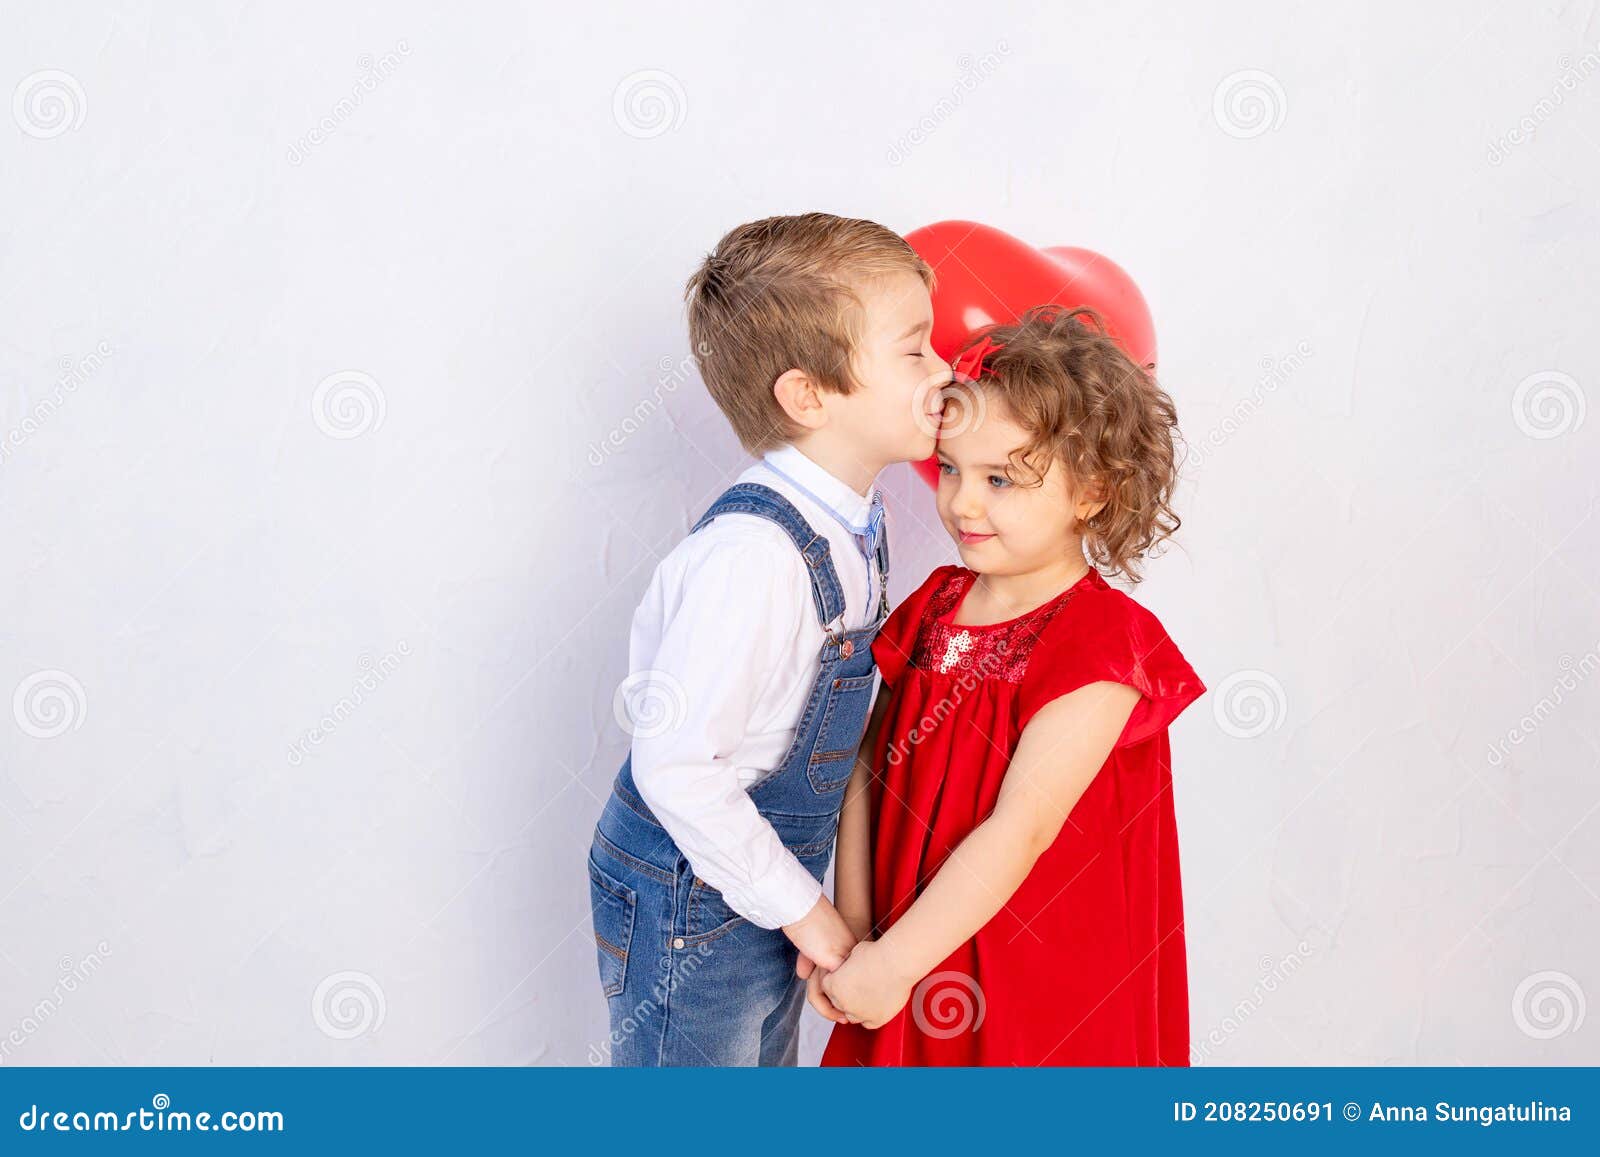 kiss couple and baby babies cute kids children kids cute baby girl baba ...